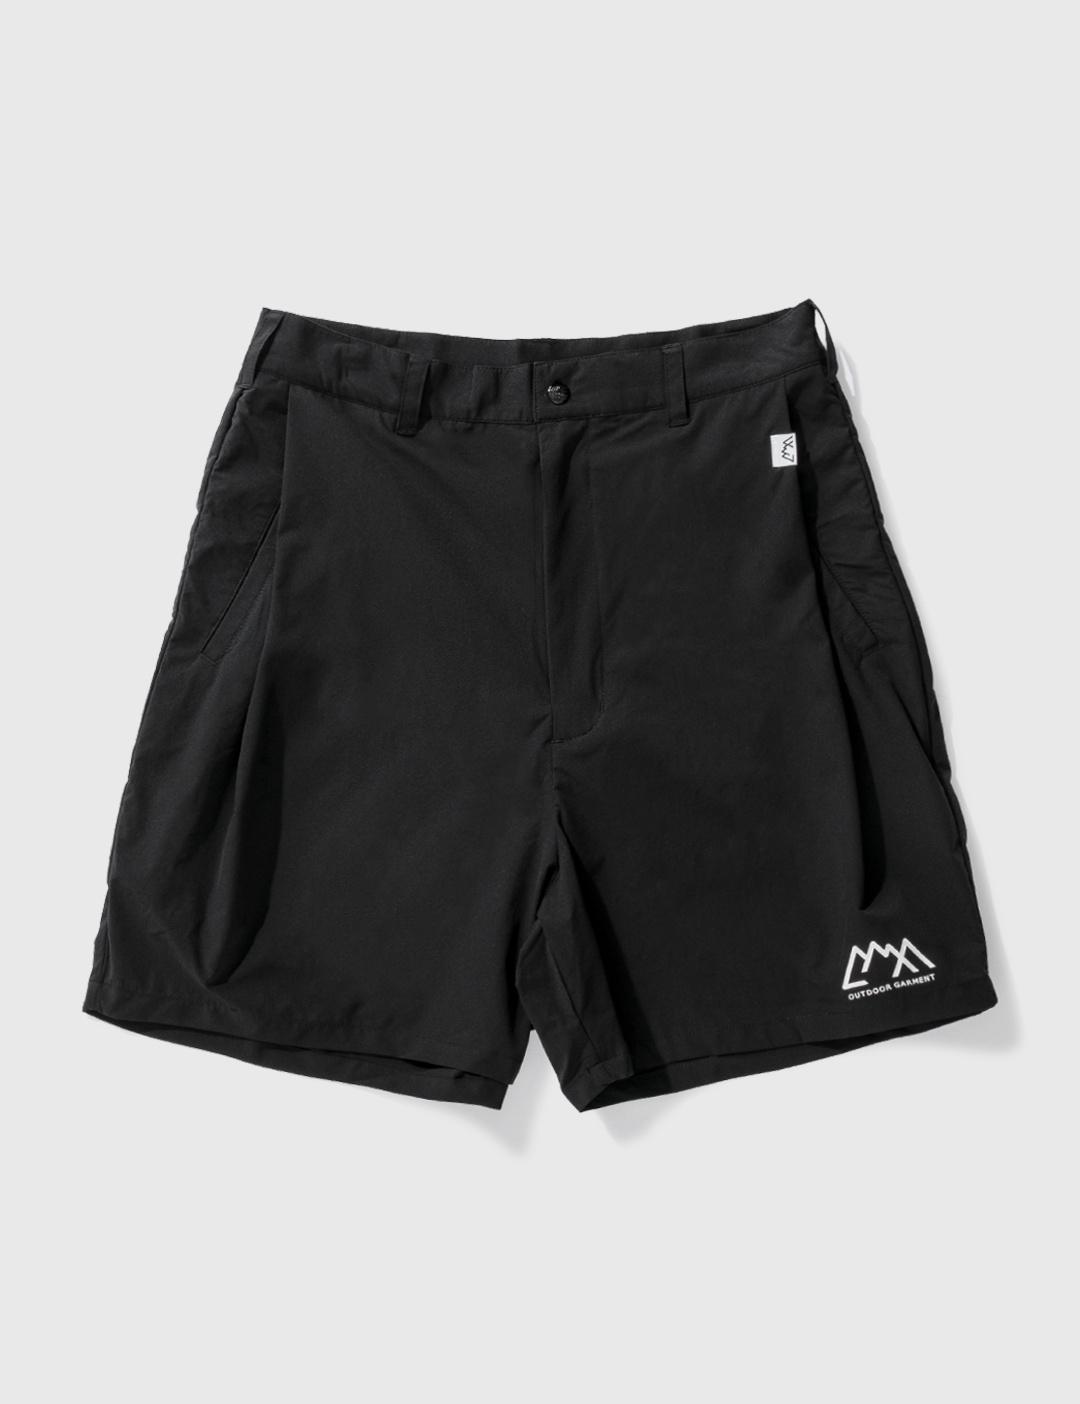 COMP SHORTS by COMFY OUTDOOR GARMENT